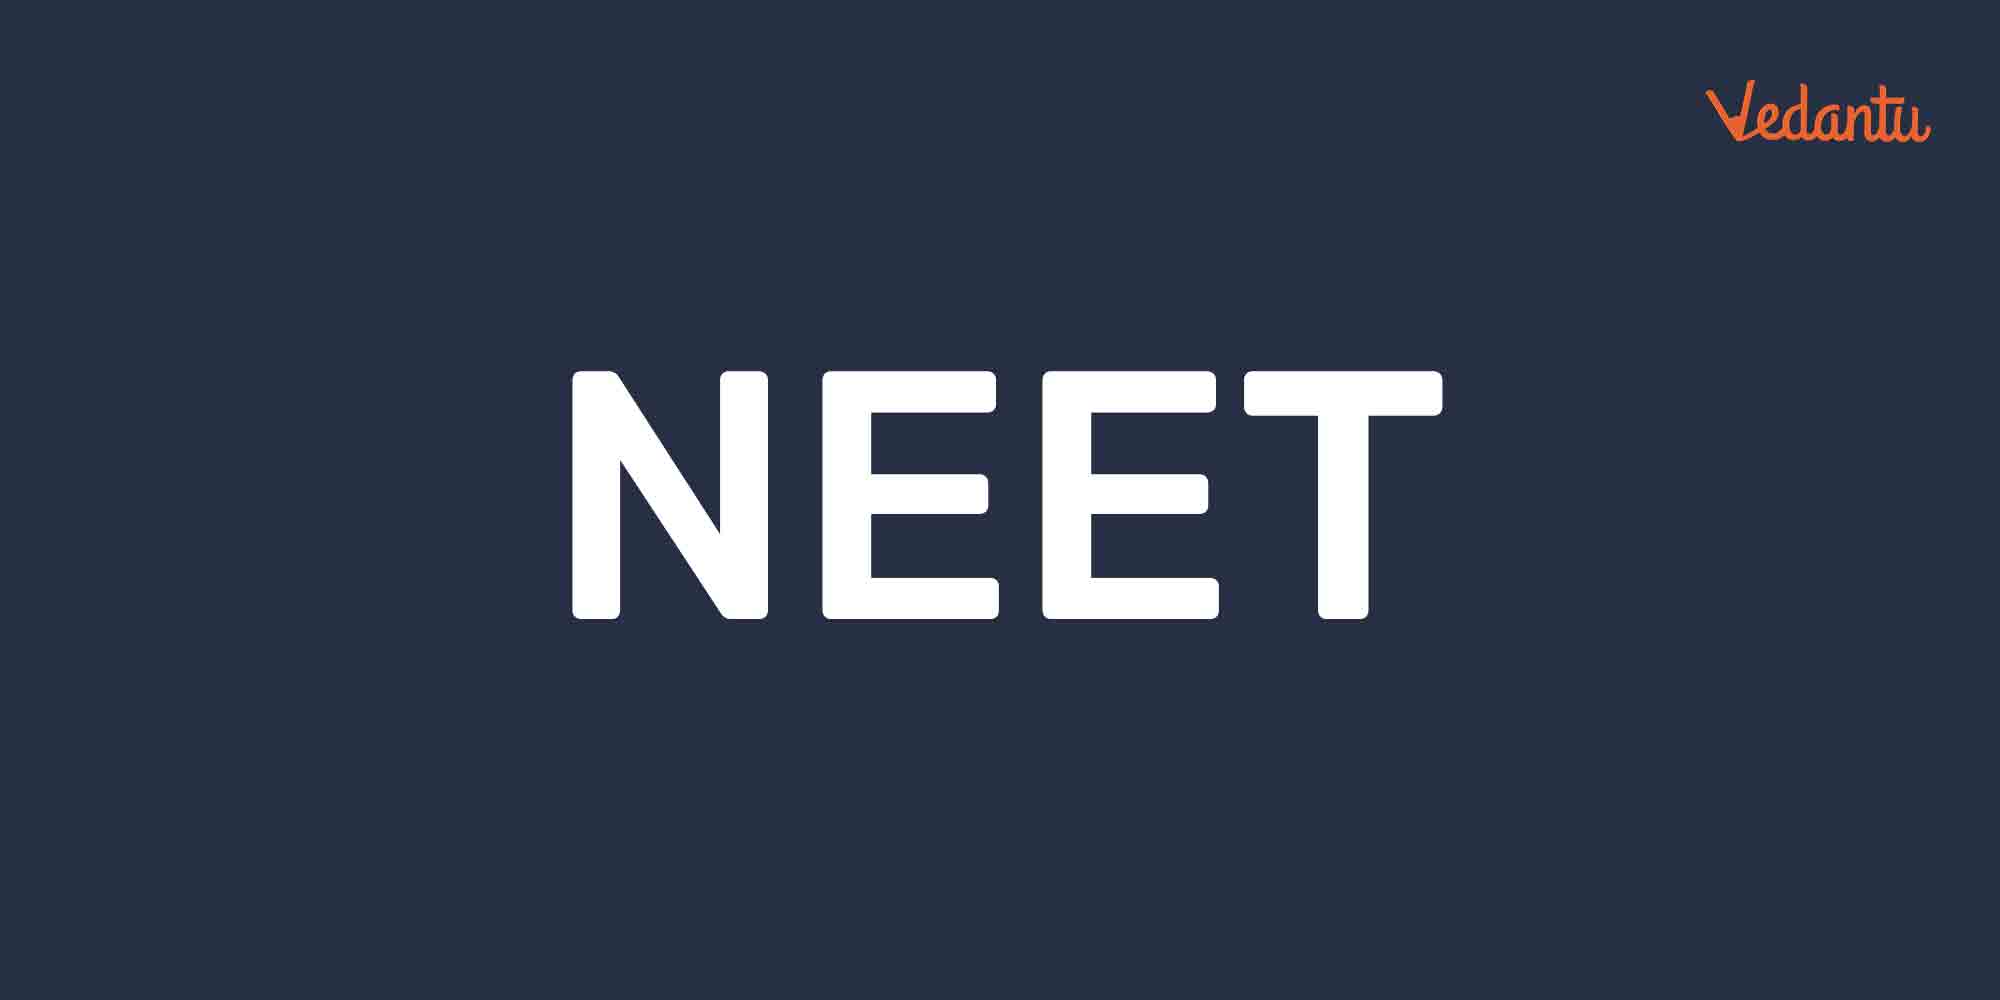 Expected Cut-off for NEET 2020 - General and Reserved Category Candidates